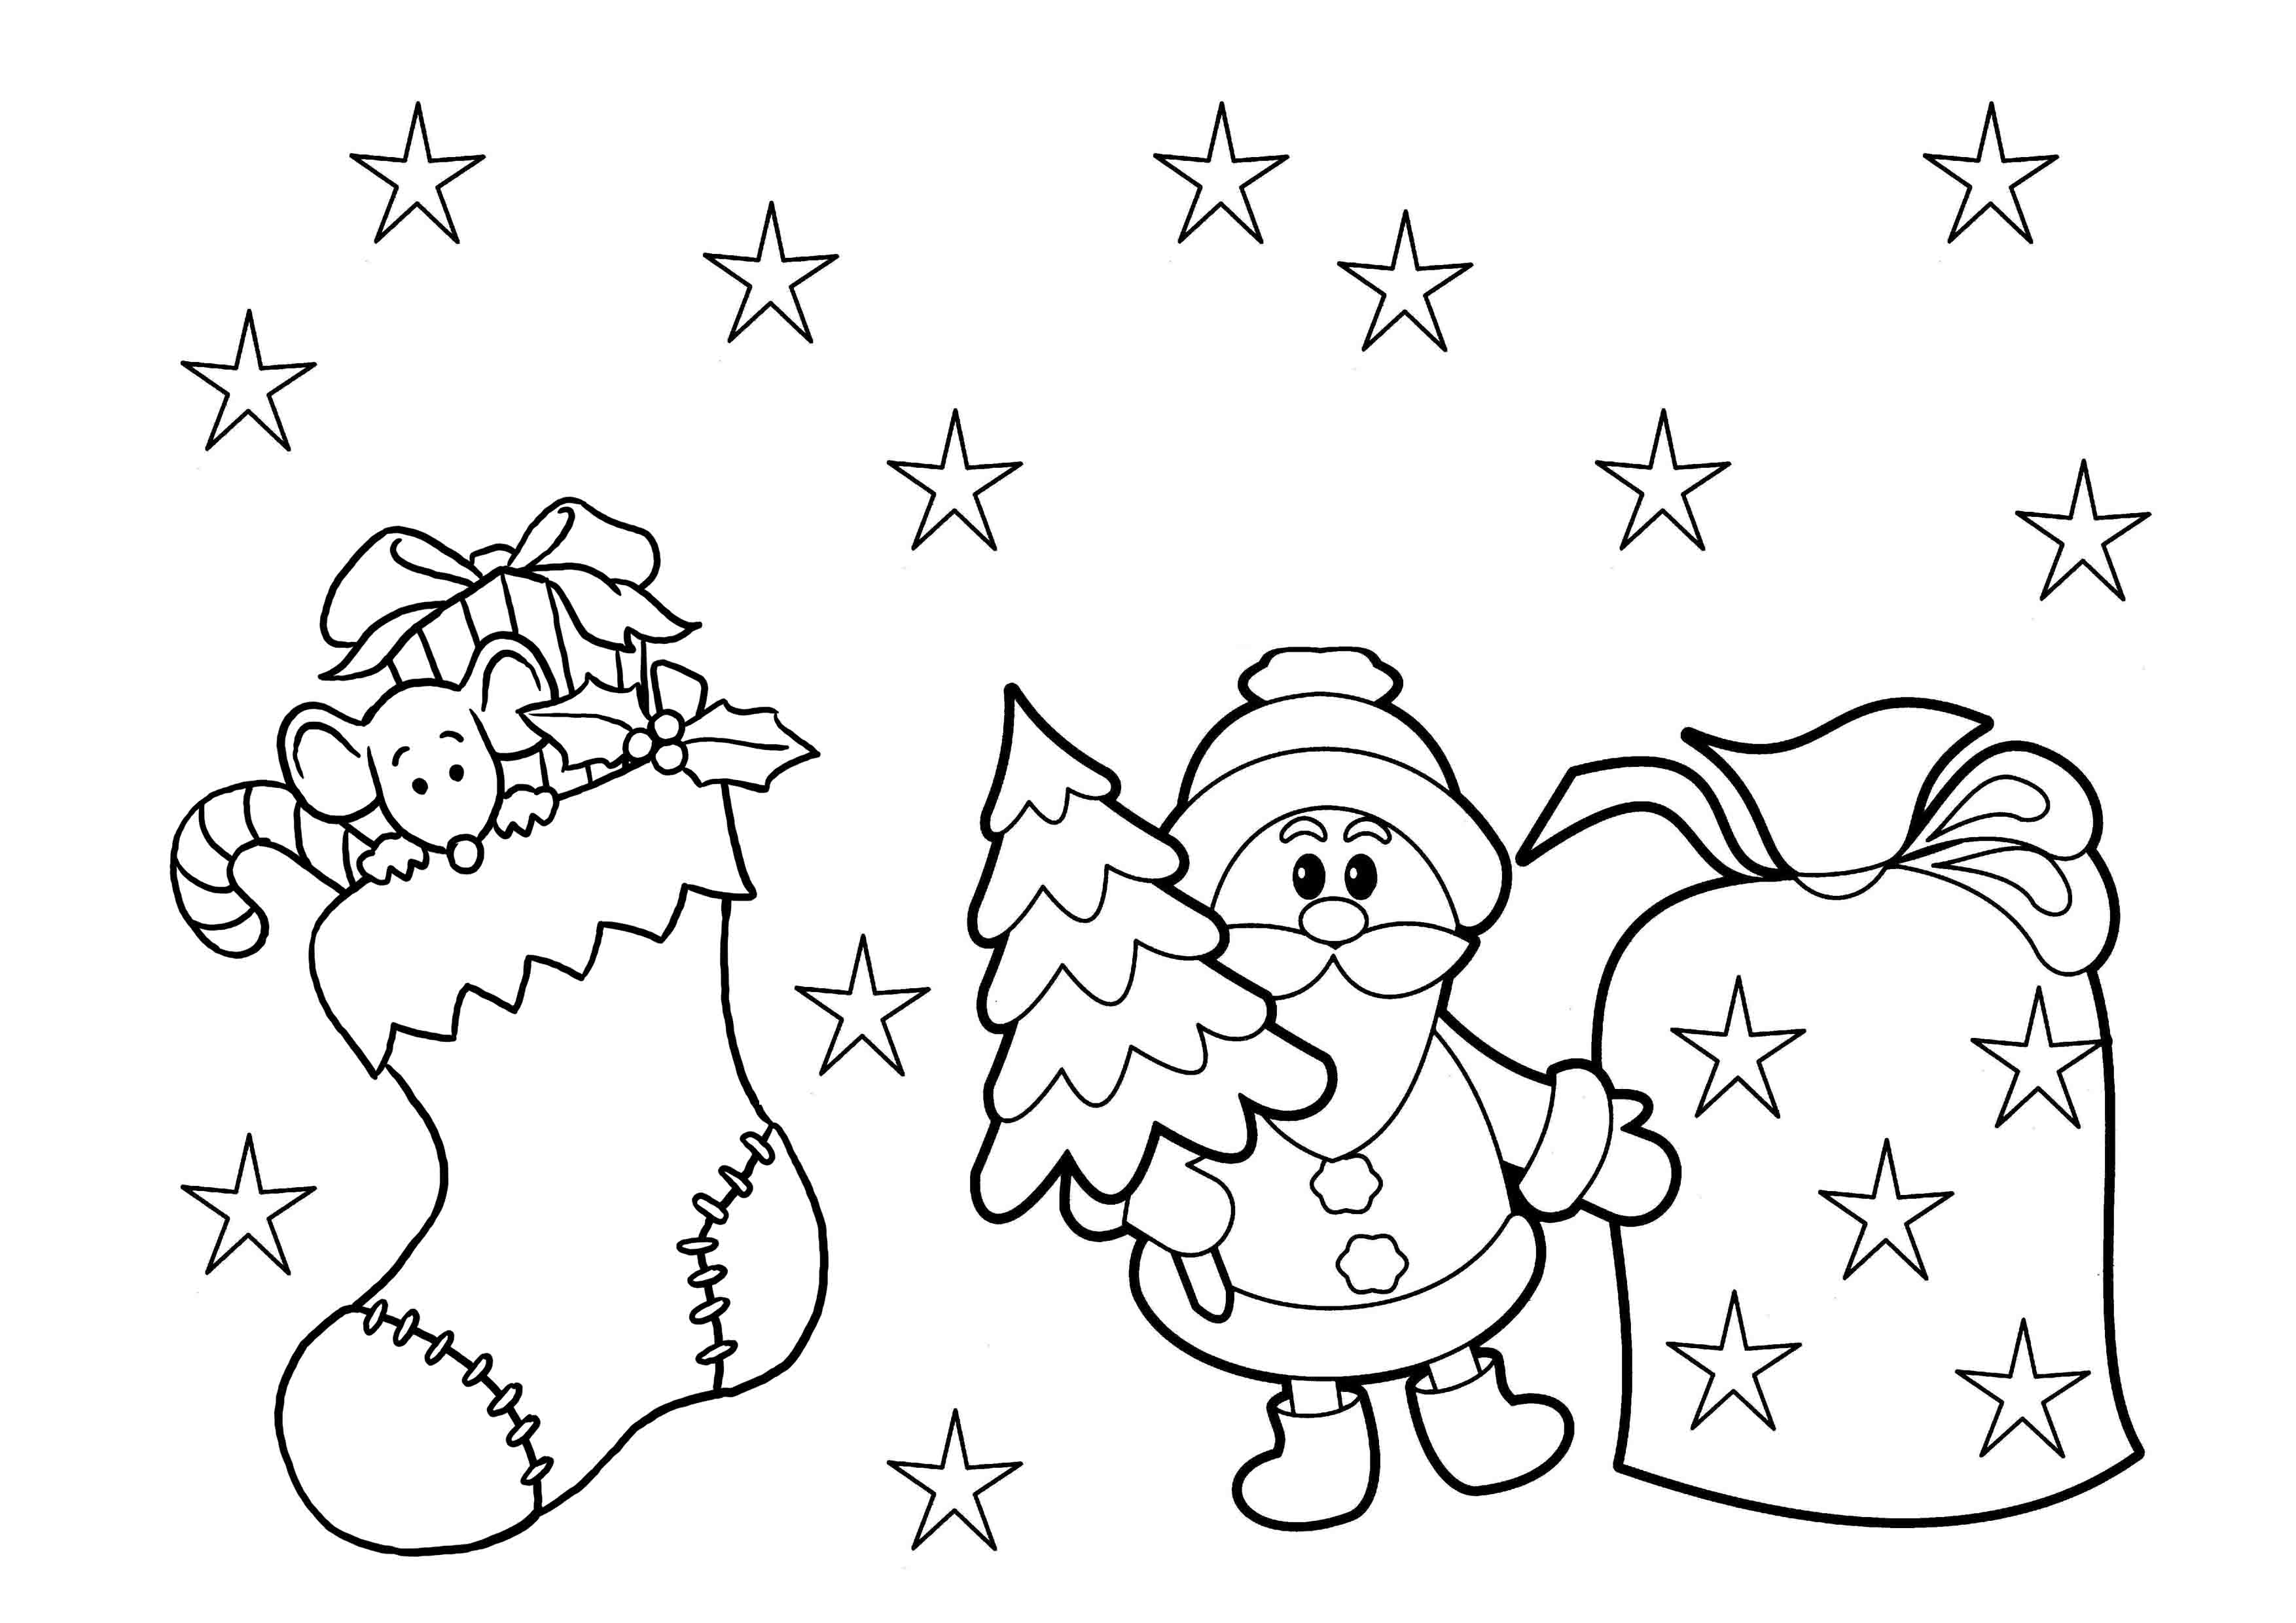 coloring-now-blog-archive-free-christmas-coloring-pages-for-kids